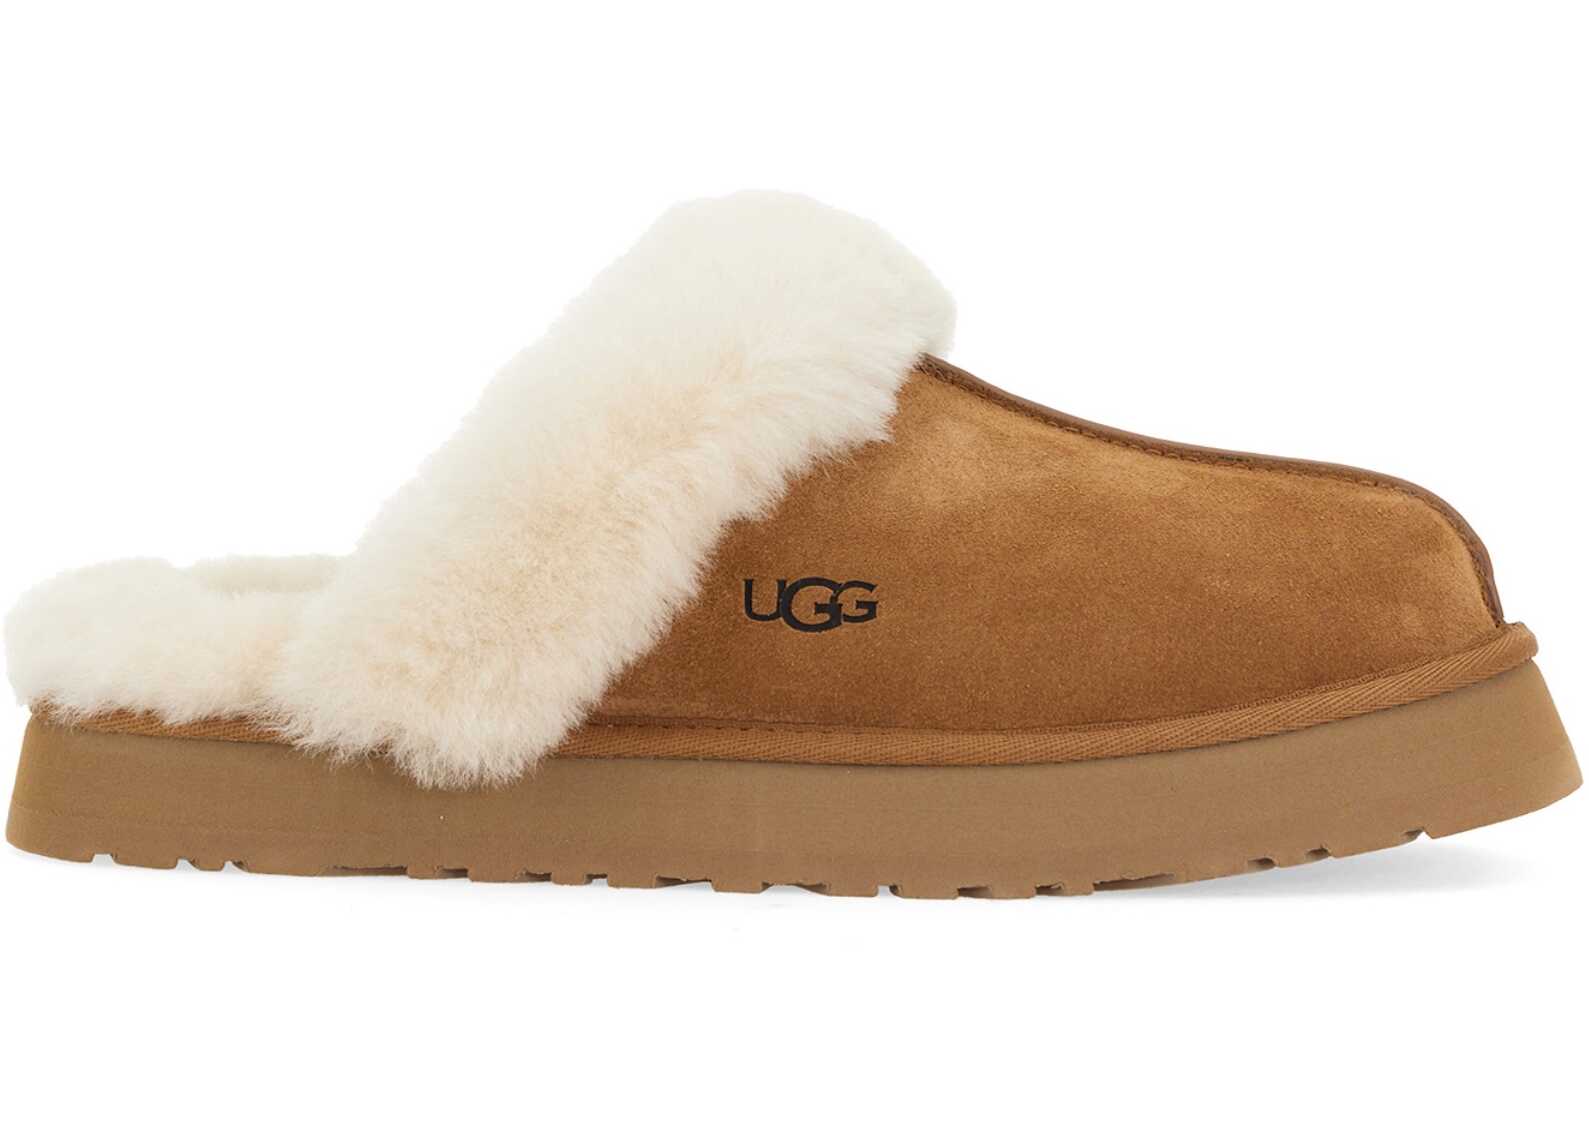 UGG Disquette Shoe BROWN